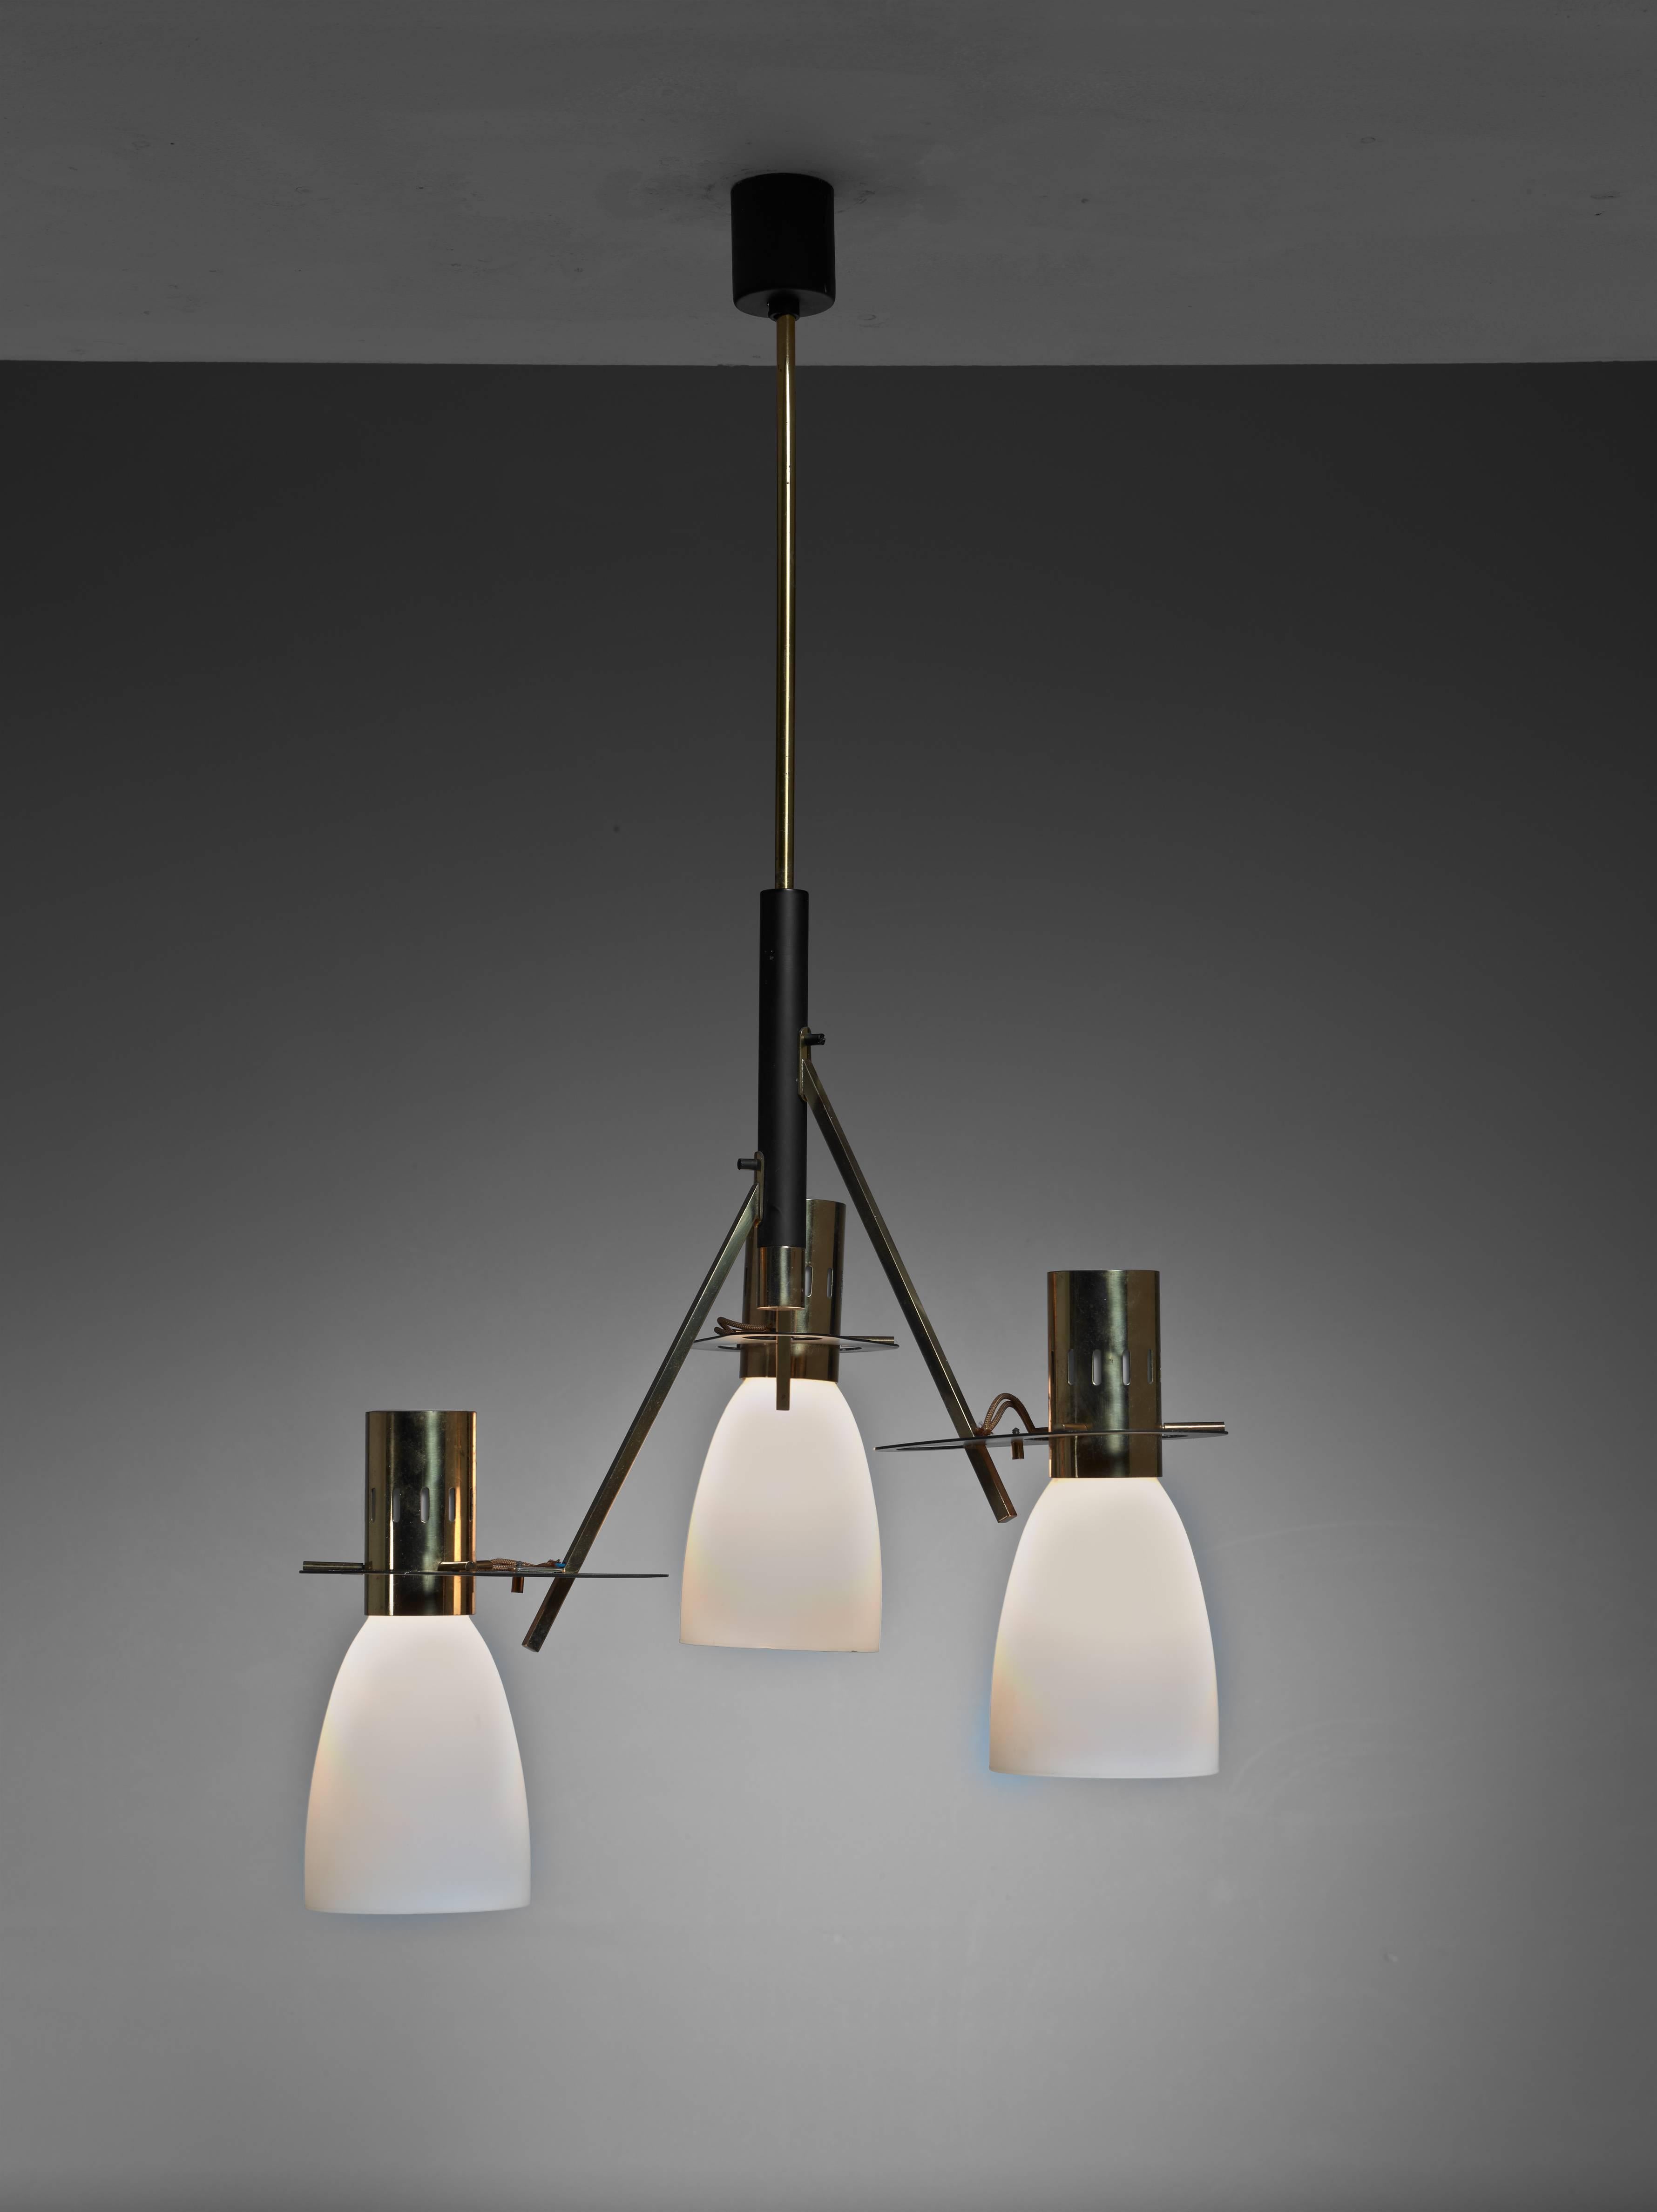 A three-armed midcentury Stilnovo brass pendant with opaline glass shades. The lamp is currently wired to shine downwards, but it can be rewired to position the shades upwards. Total drop can be adjusted to your requirements.